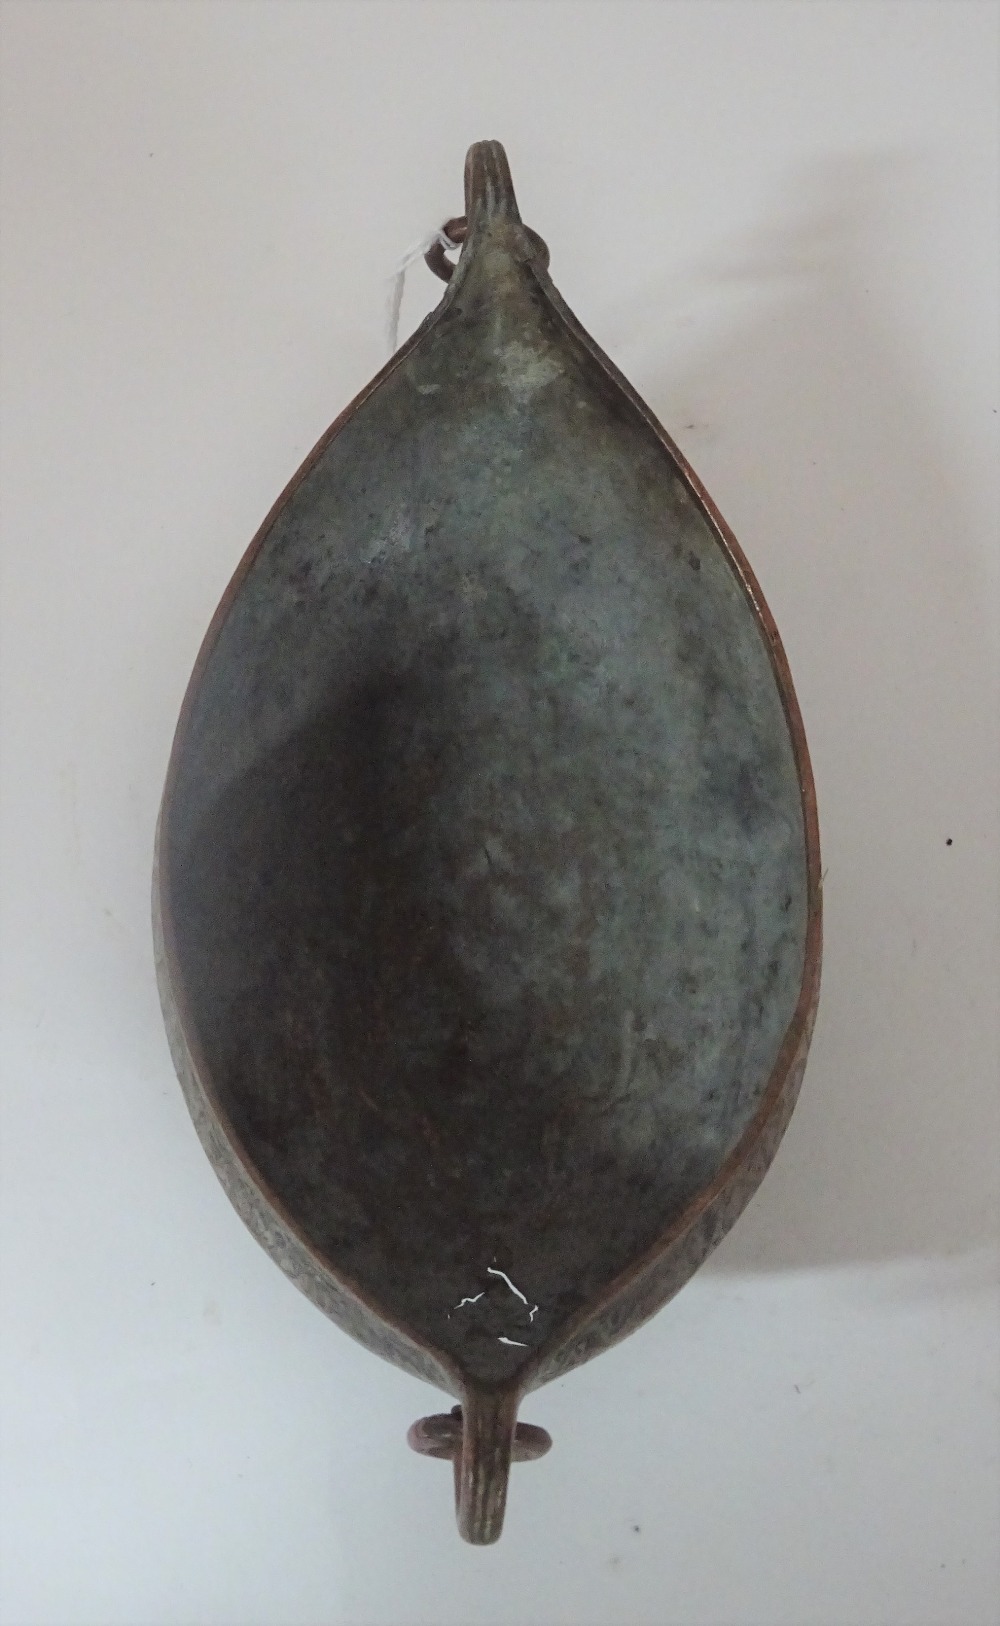 A Safavid tinned copper kachkol, possibly 18th century, of boat shape with ring handles, - Image 3 of 5